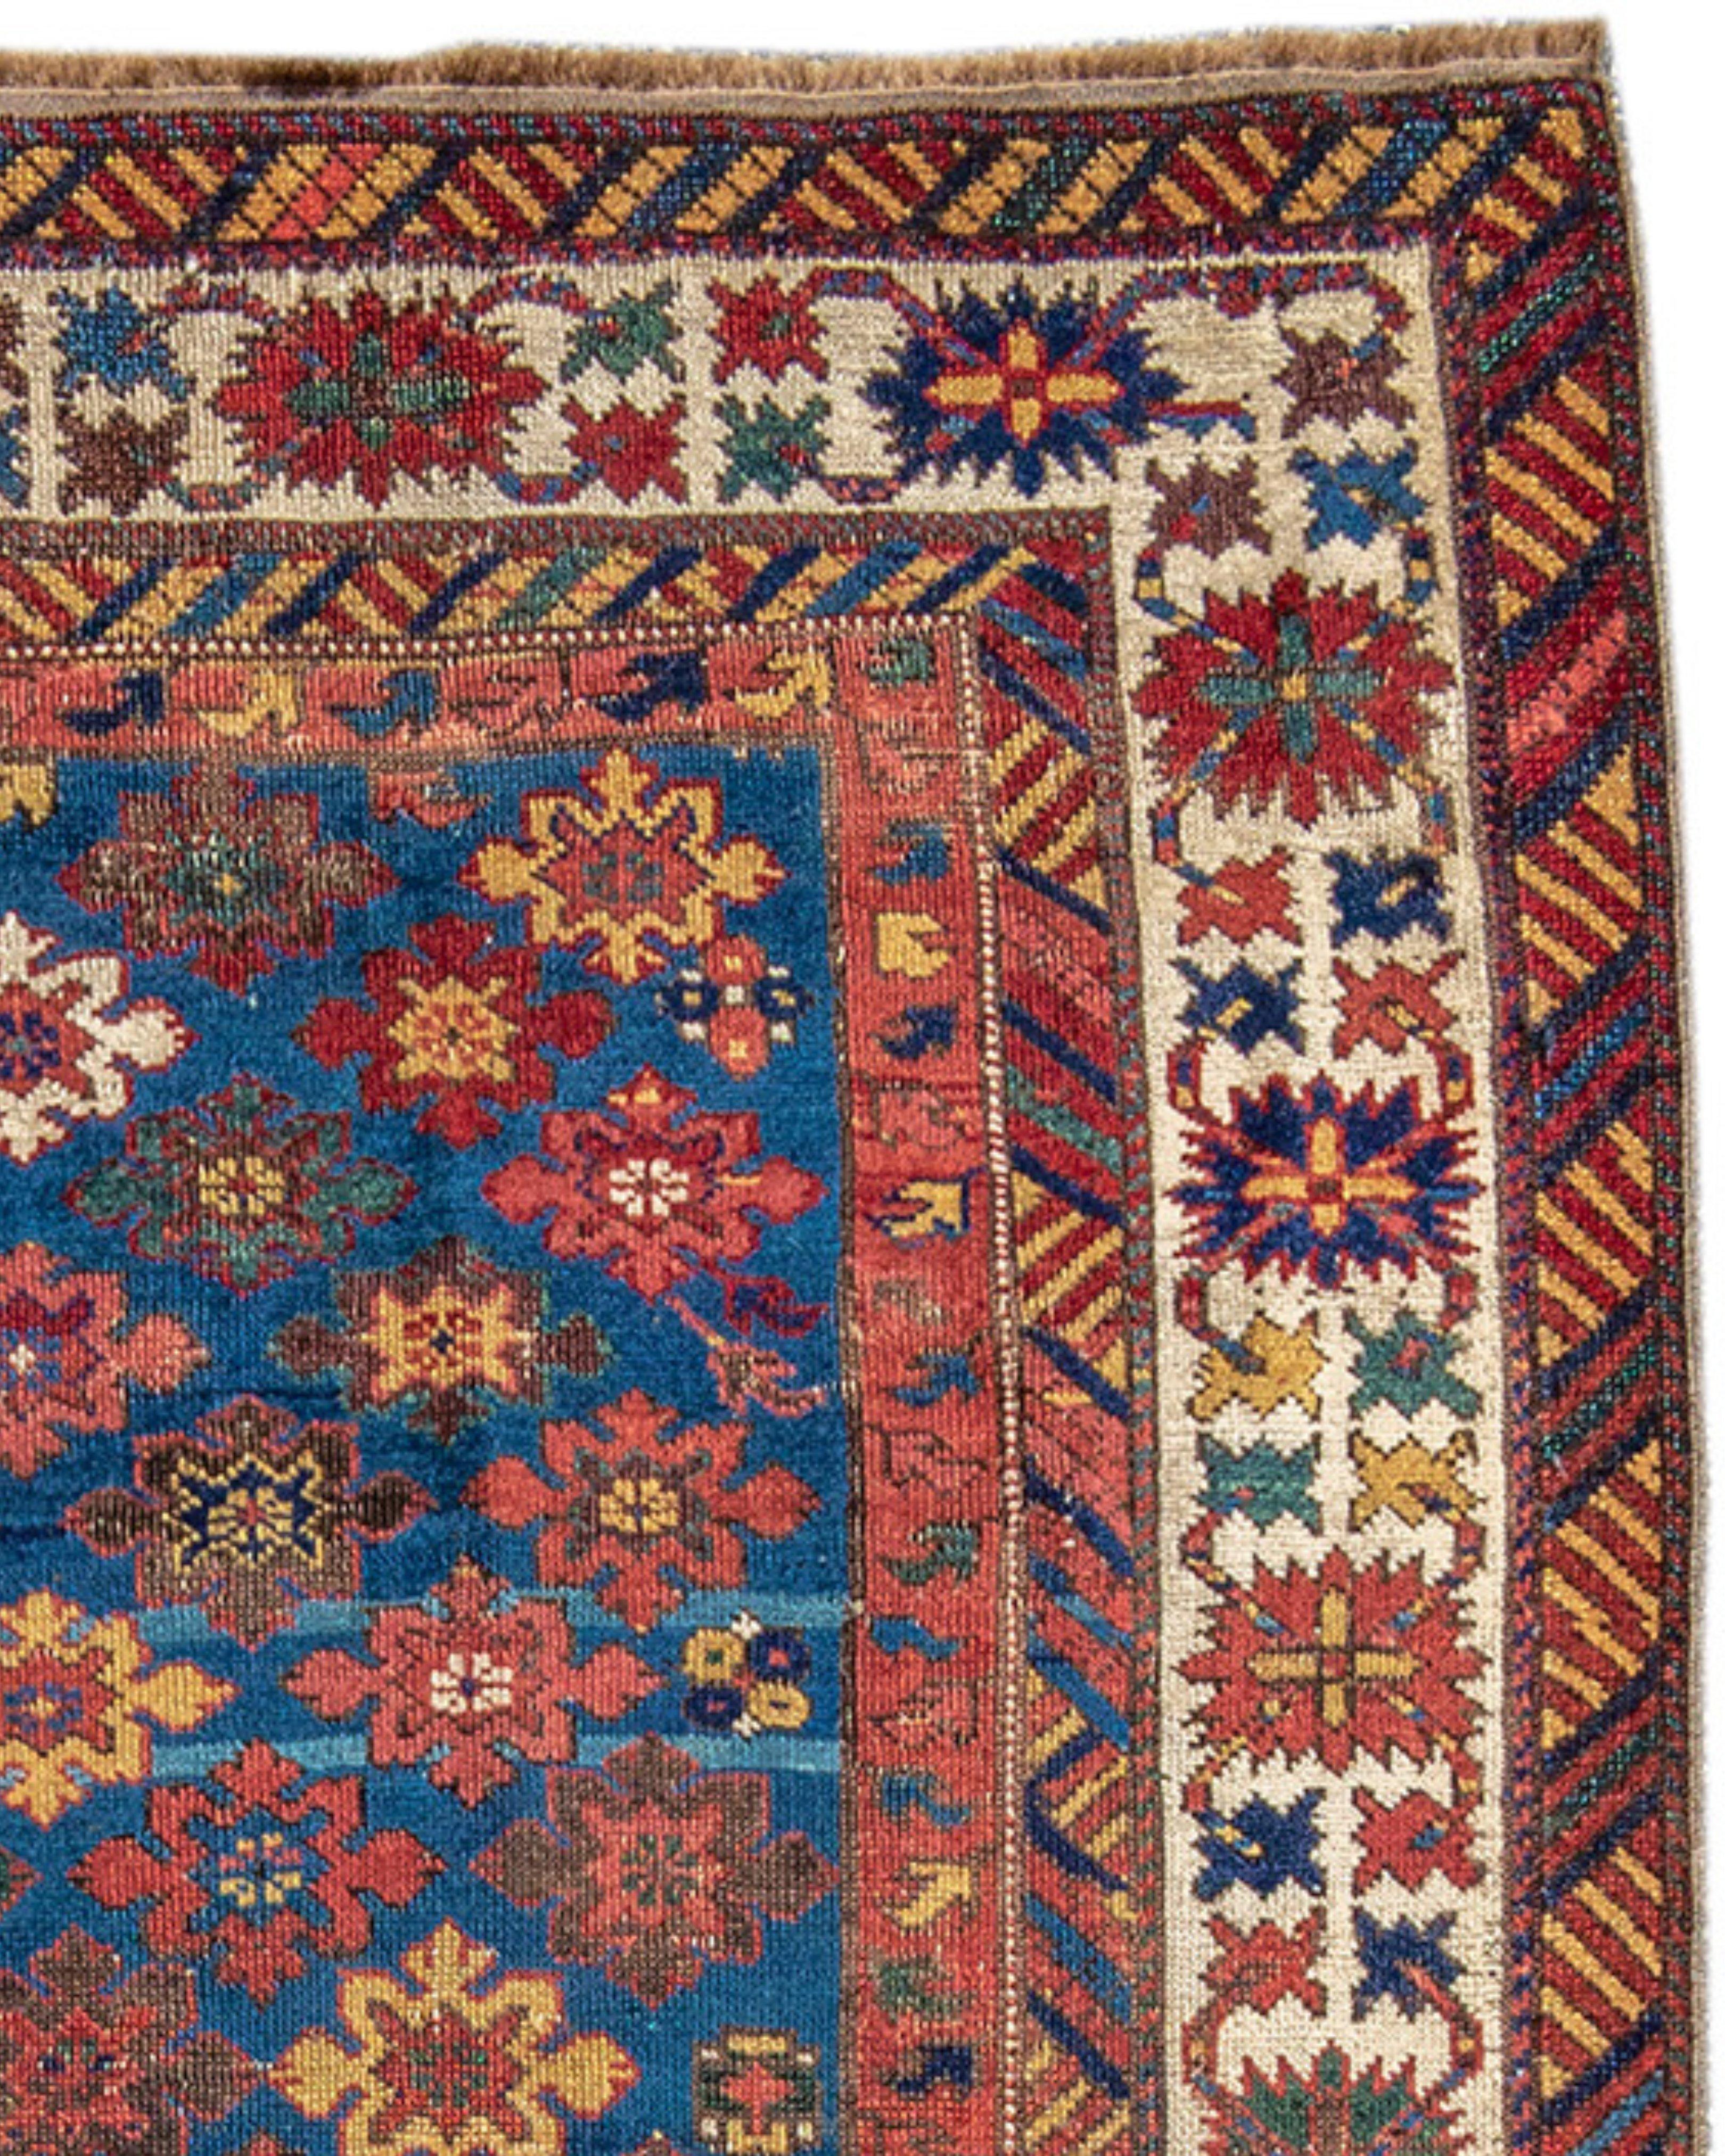 Antique Caucasian Kuba Rug, 19th Century

The Collection of Dr. Charles Whitfield

Additional Information:
Dimensions: 3'7